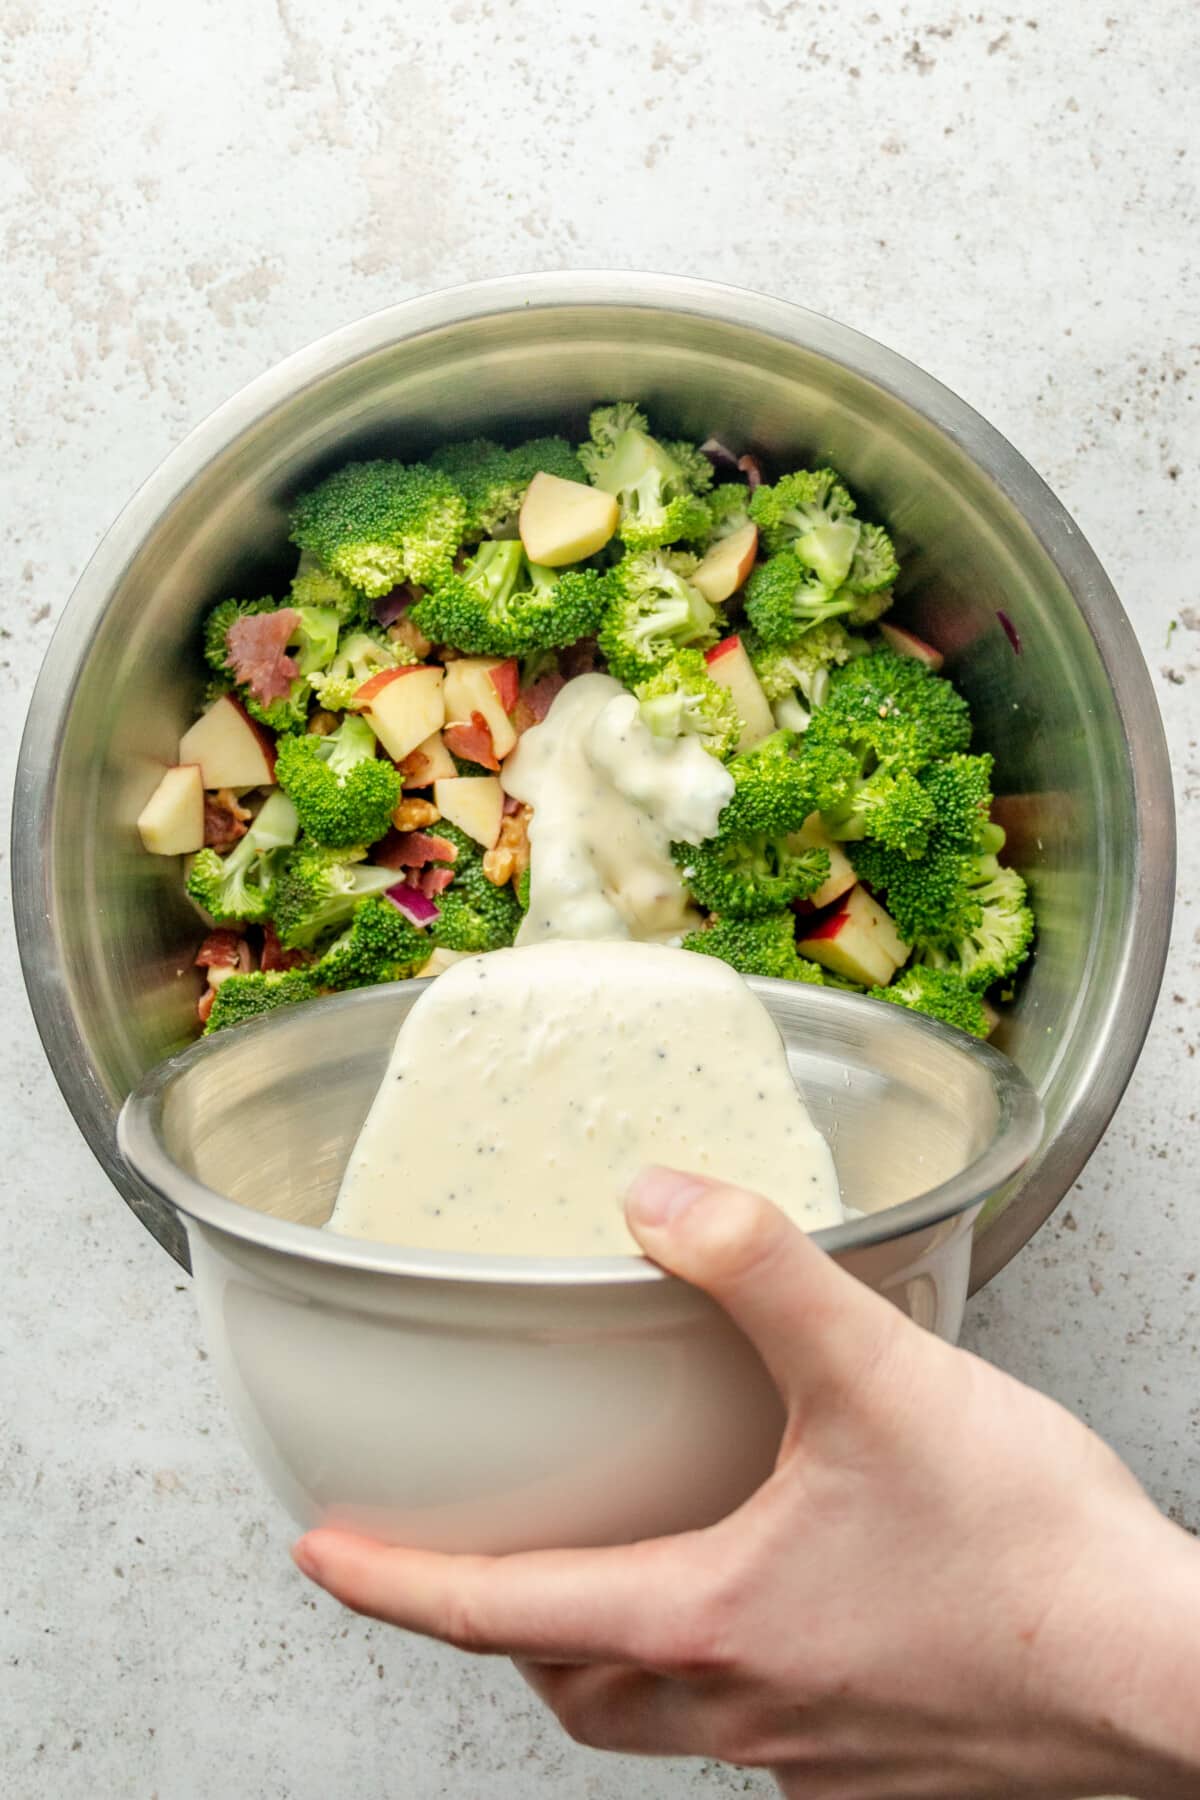 A dressing is poured over crunchy broccoli salad sitting in a stainless steel bowl on a light grey surface.